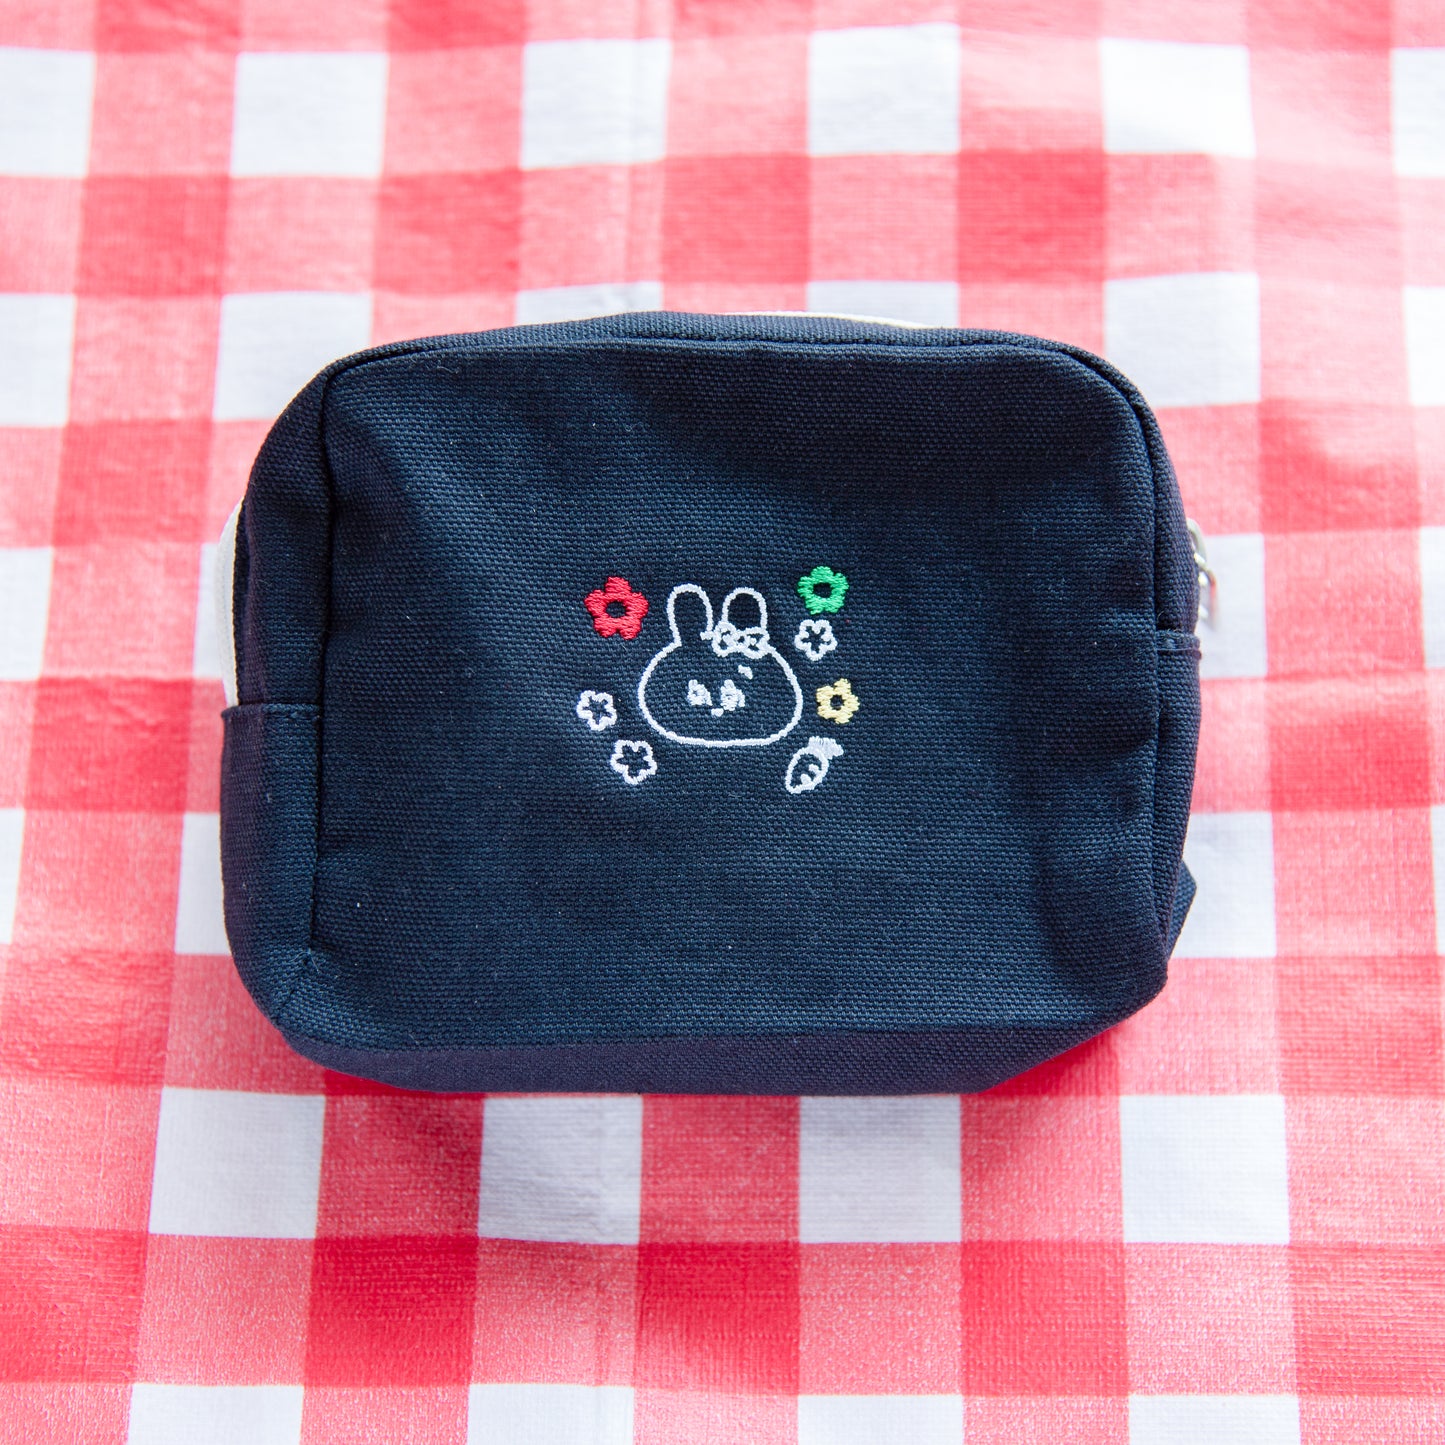 [Asamimi-chan] Embroidery square pouch [Made to order]